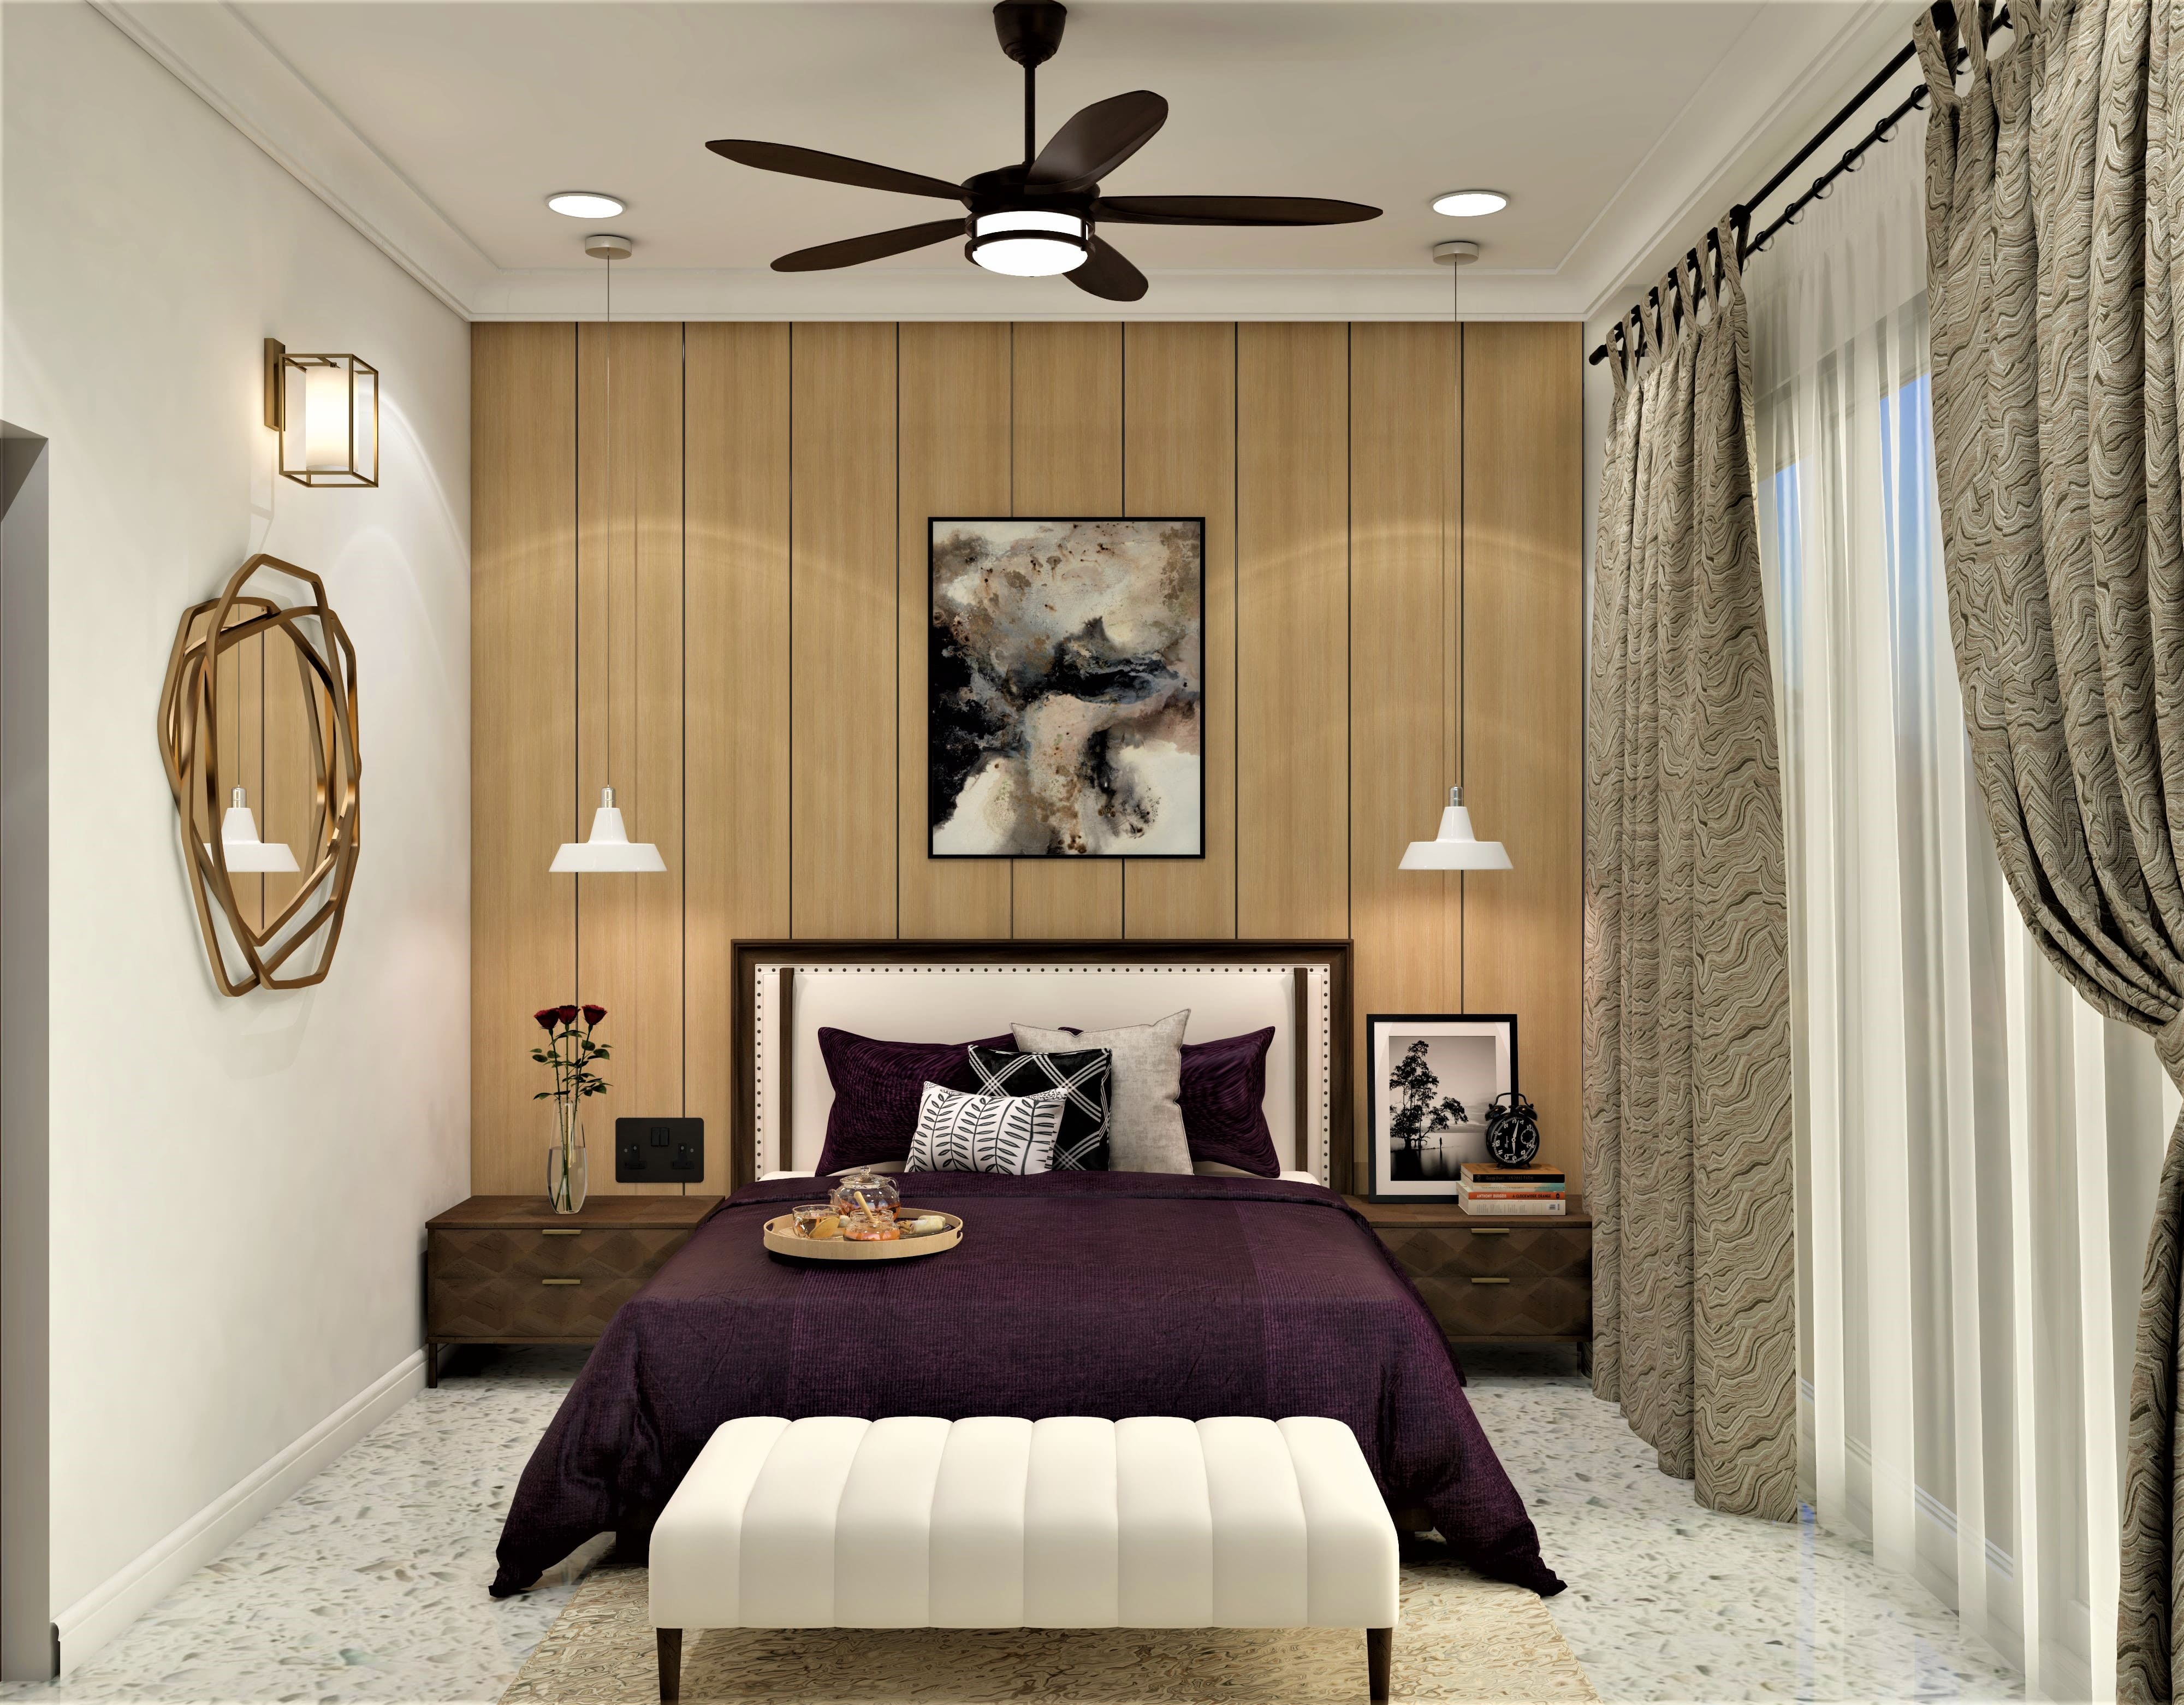 Simple bedroom design with wooden panelling - Beautiful Homes